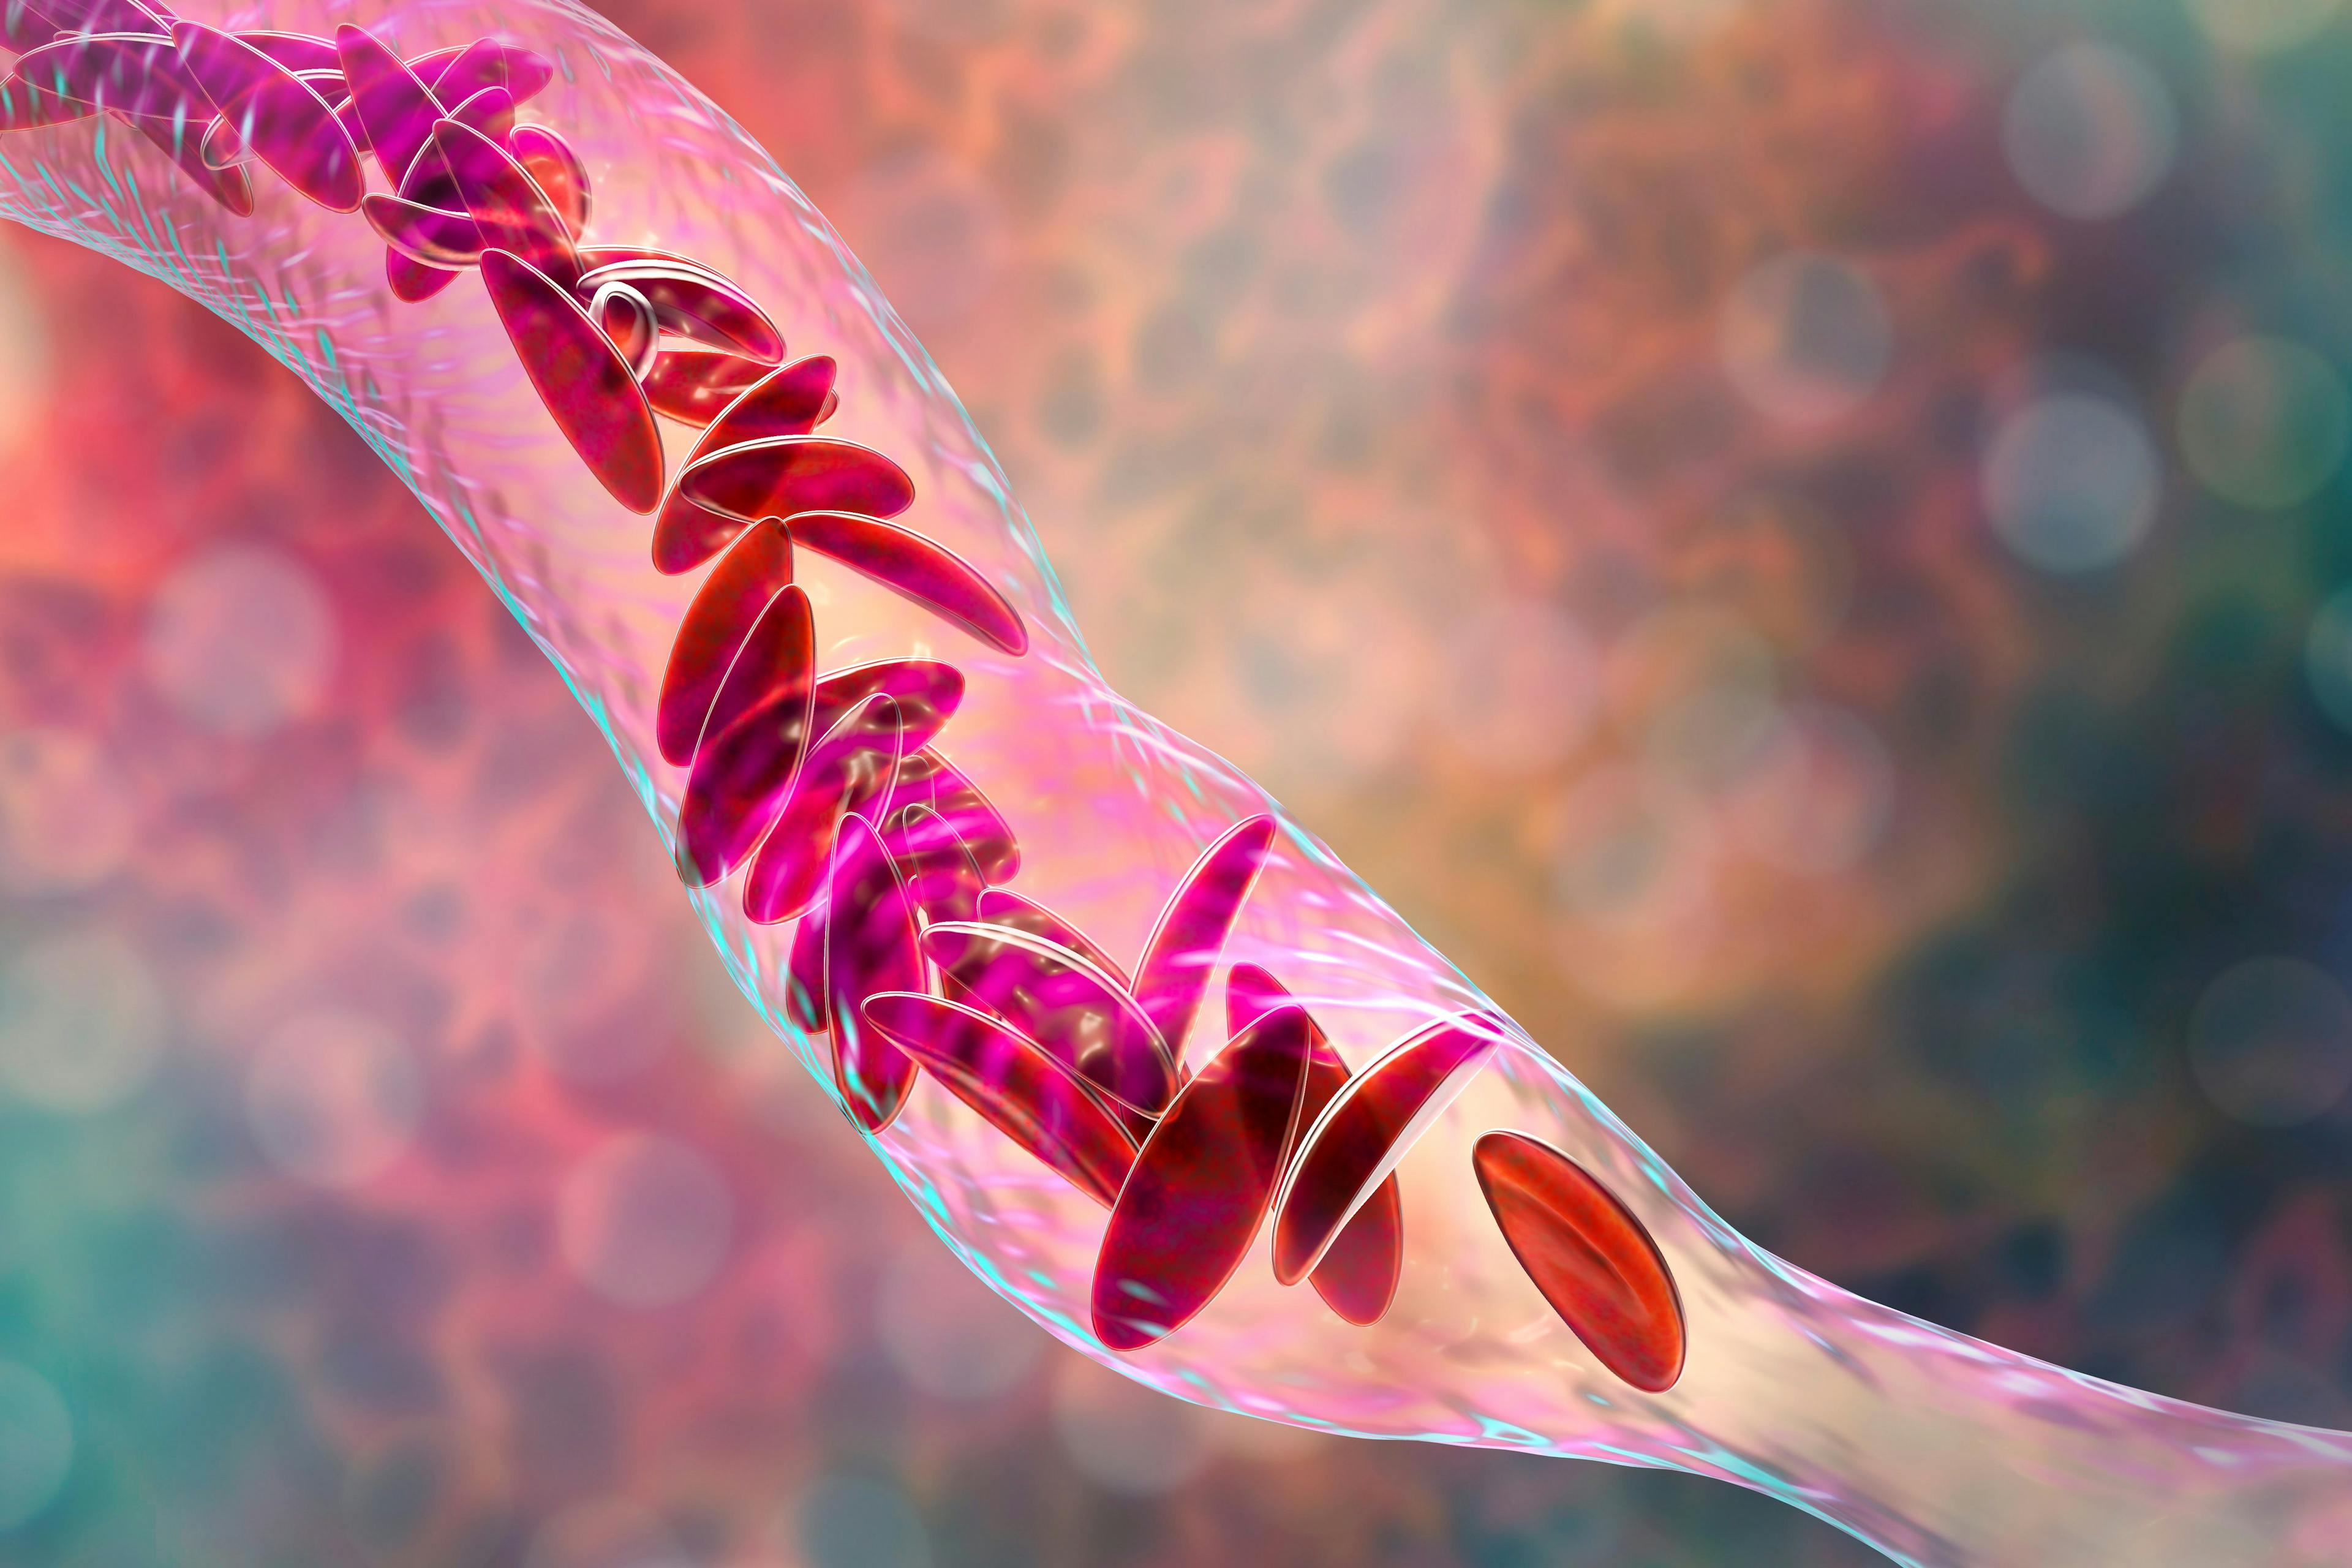 Sickle cell anemia, 3D illustration. | Image credit: Dr_Microbe - stock.adobe.com